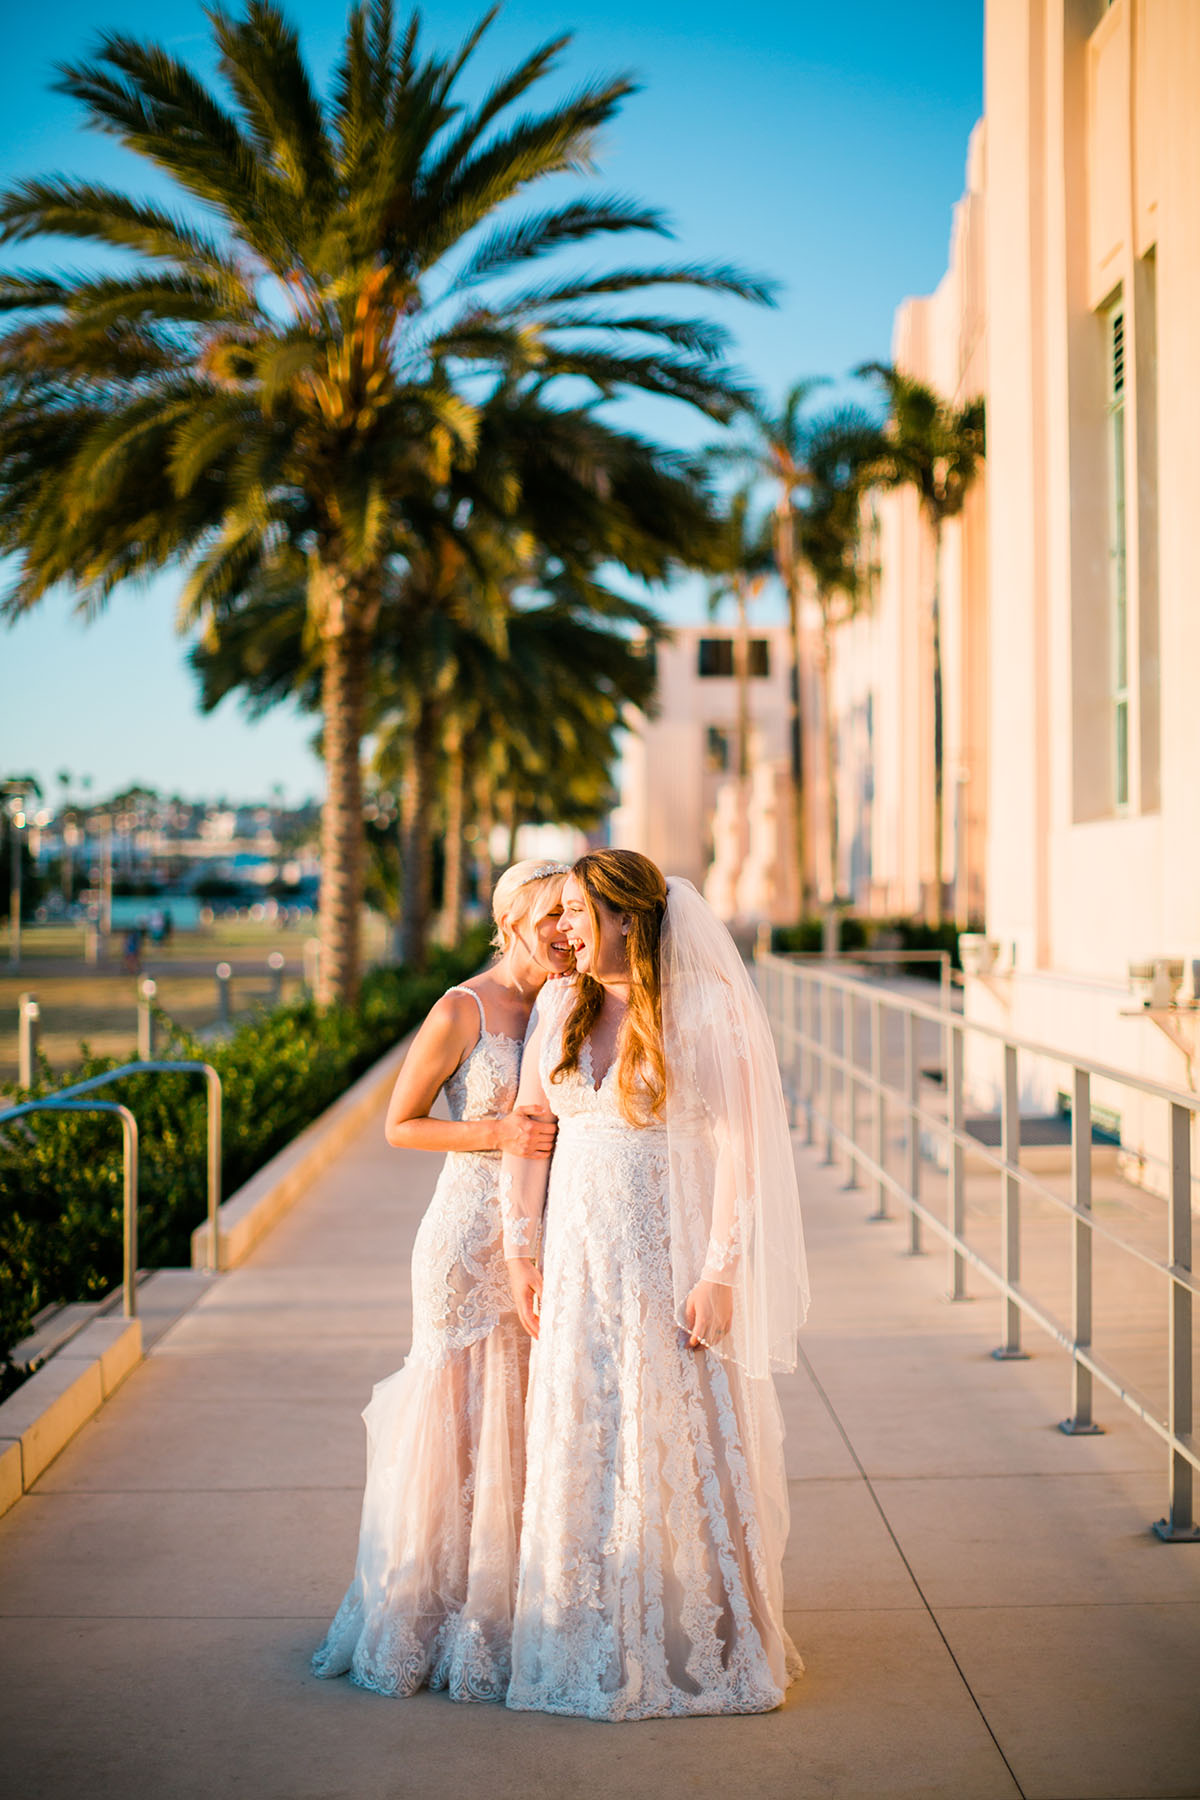 Whimsical, rustic waterfront wedding in San Diego, California two brides LGBTQ+ weddings sunny succulents sunset palm tree